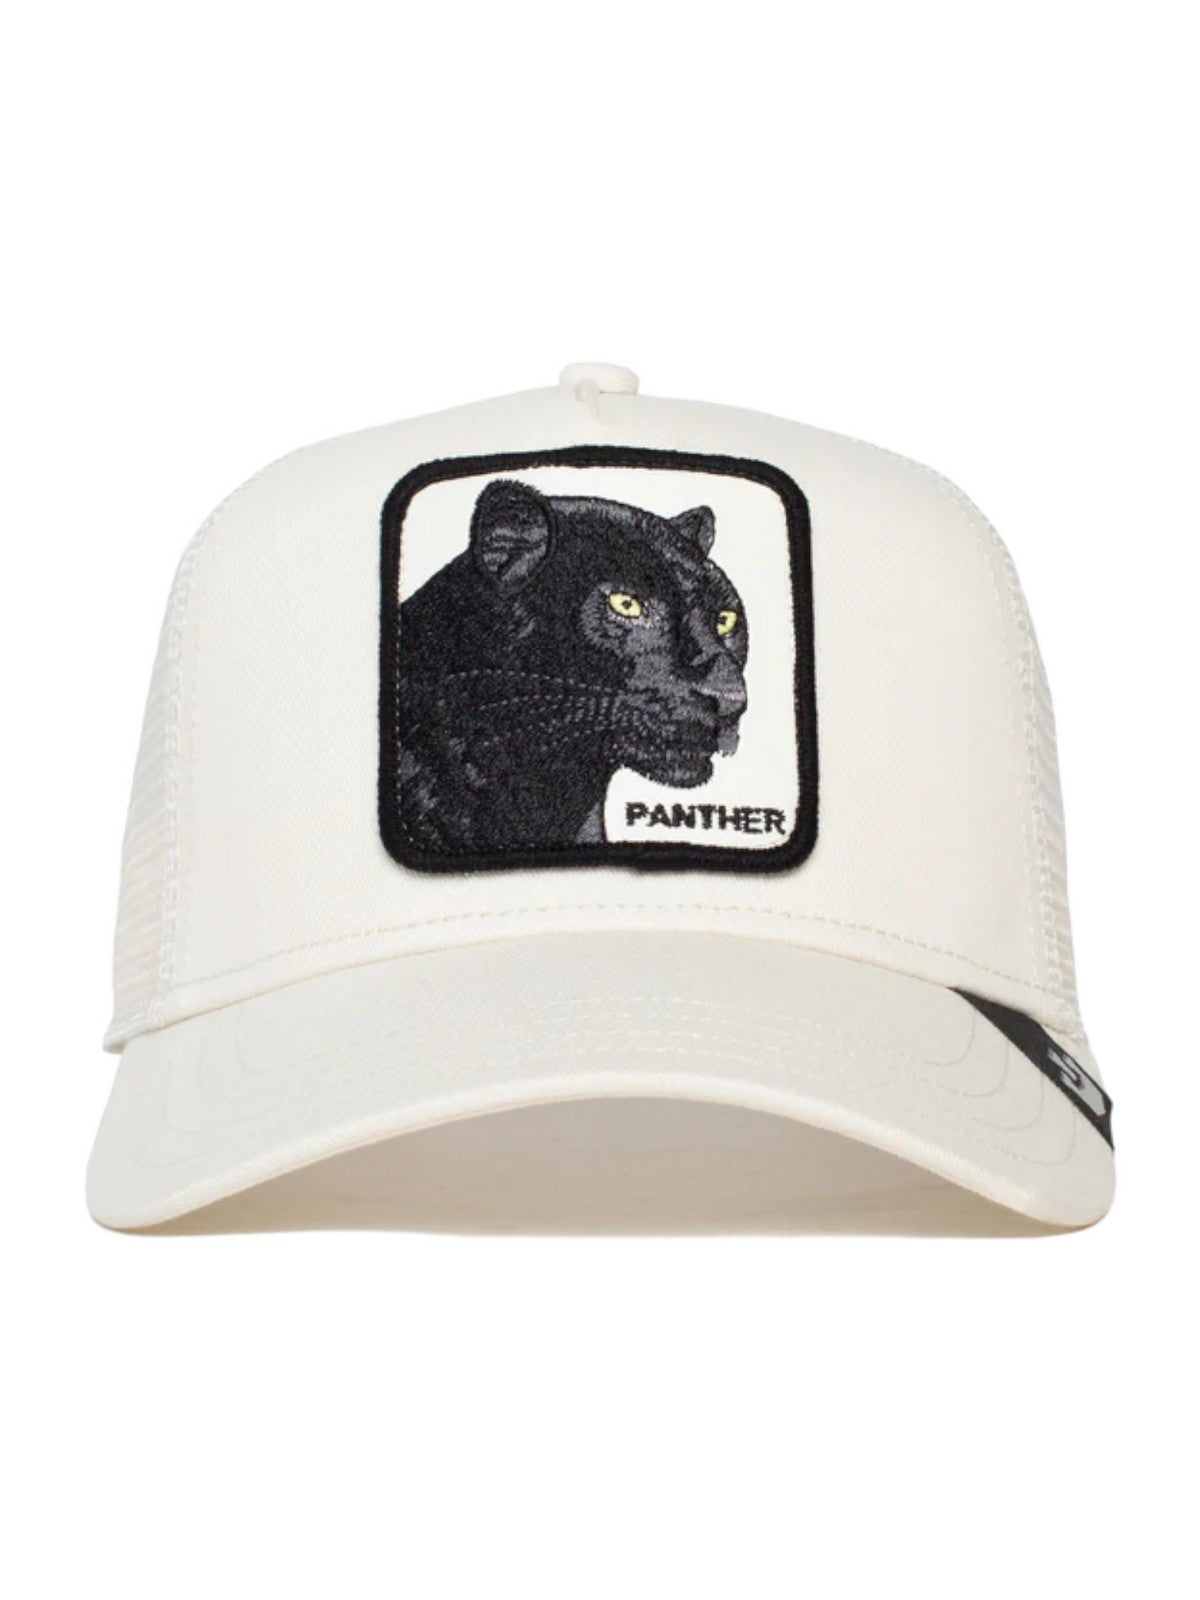 GOORIN BROS Casquette homme The panther 101-0381-WHI Blanc